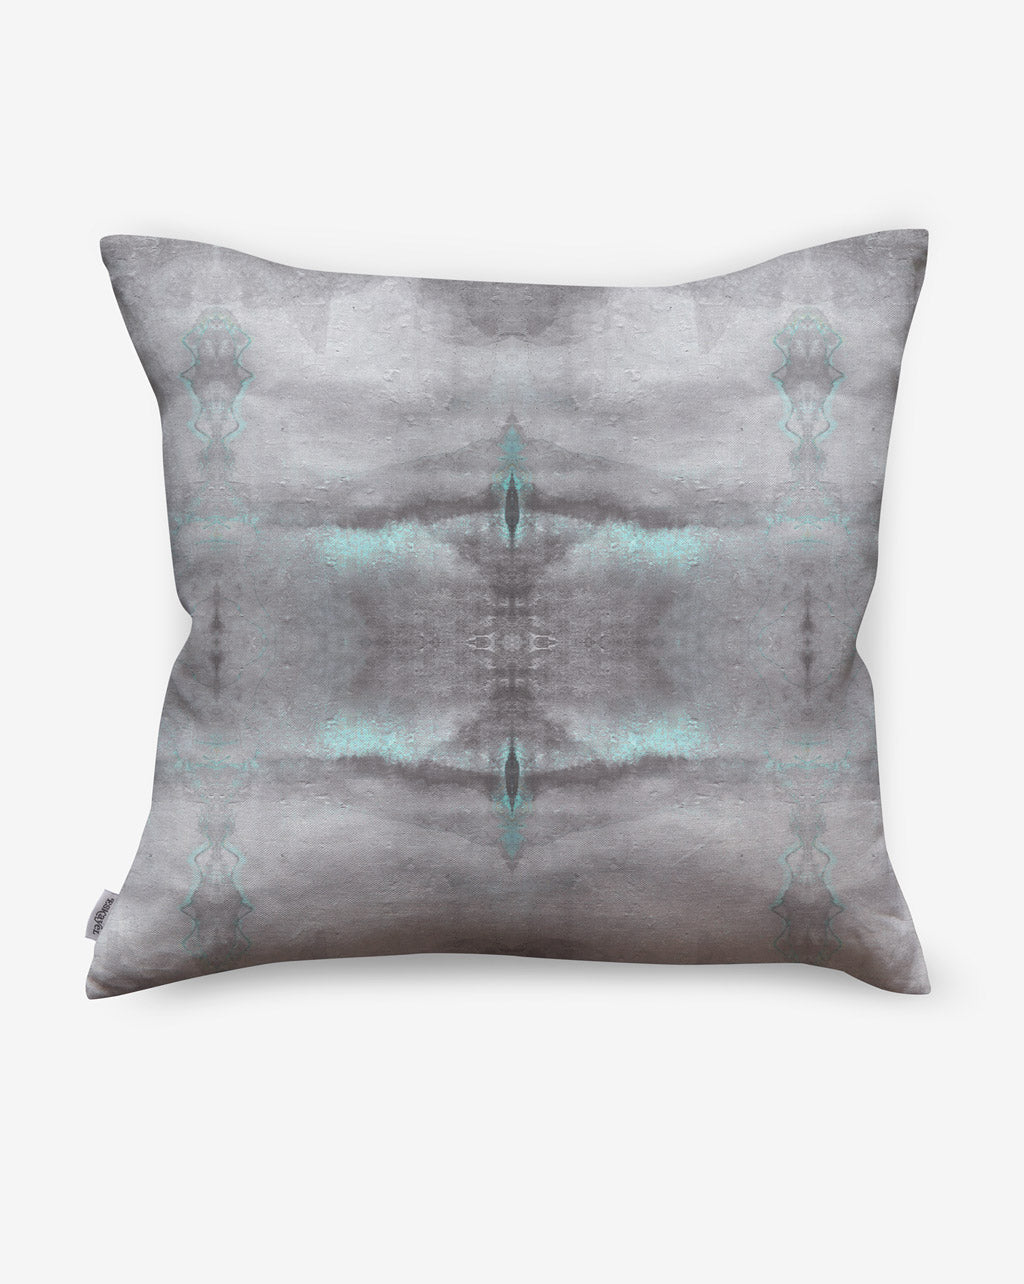 A grey luxury performance Poolside Outdoor Pillow Viridian with a turquoise design on it